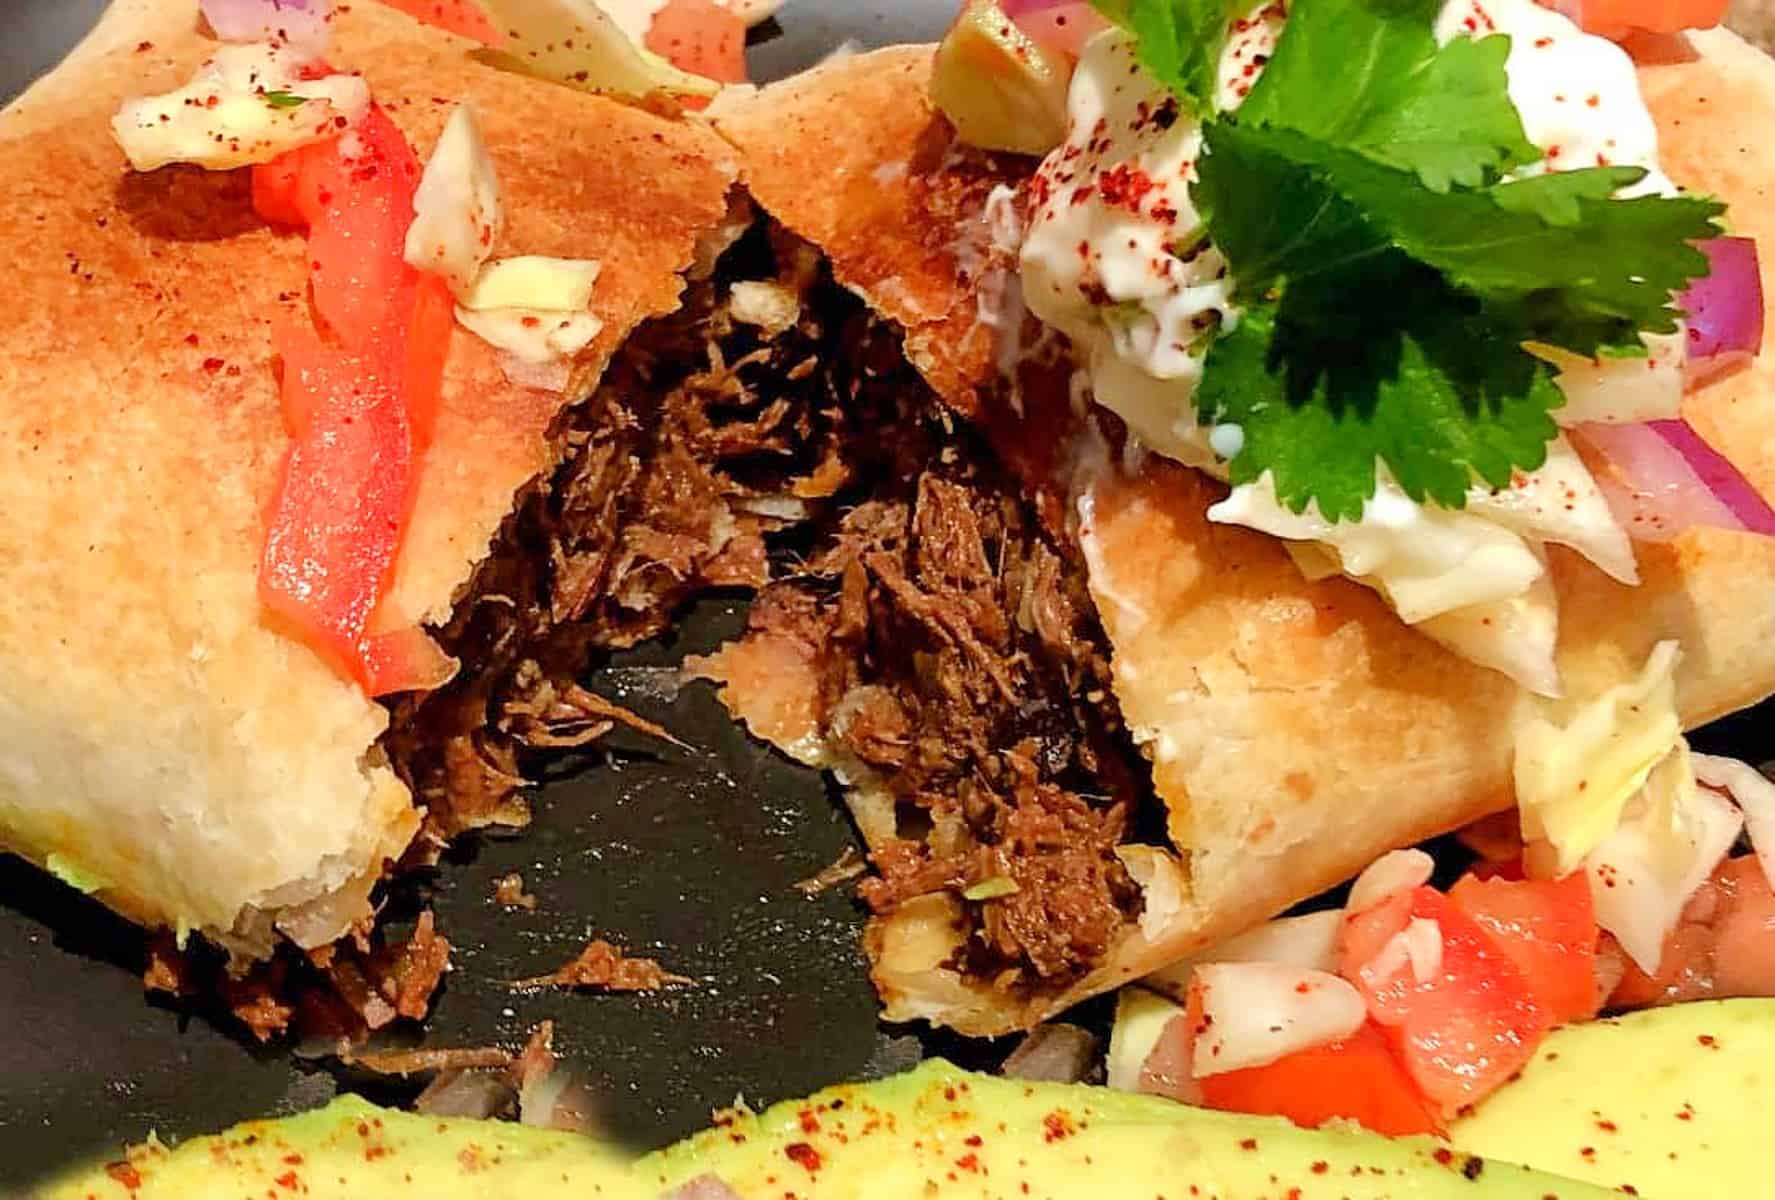 shredded-beef-chimichanga-made-in-the-air-fryer-cut-in-half.